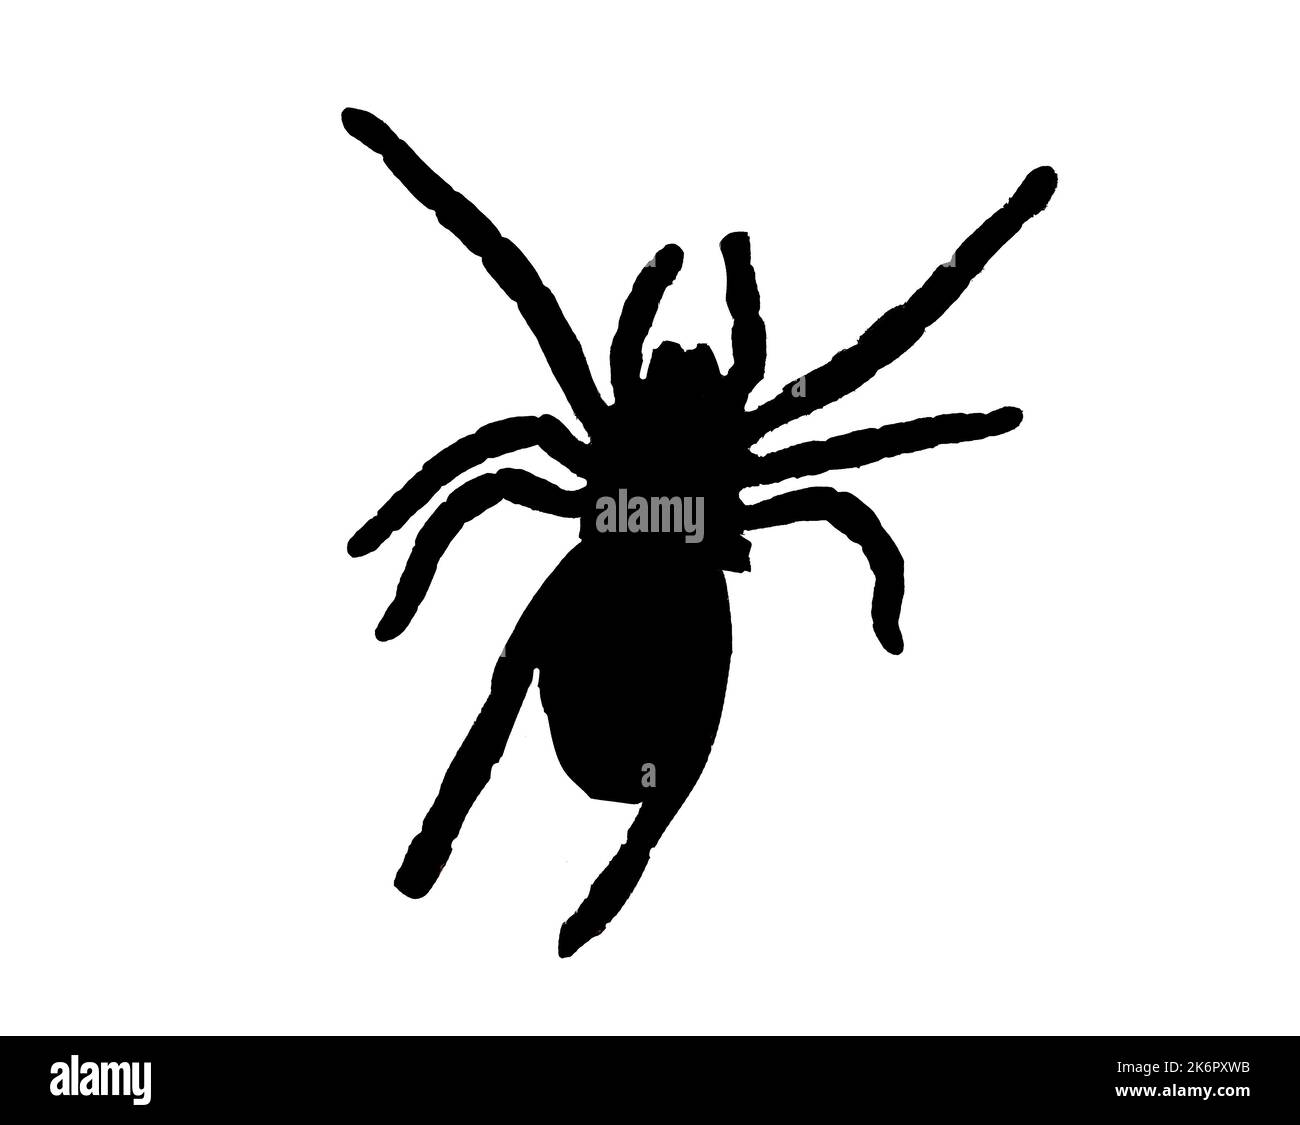 large Black spider silhouette on a white background Stock Photo